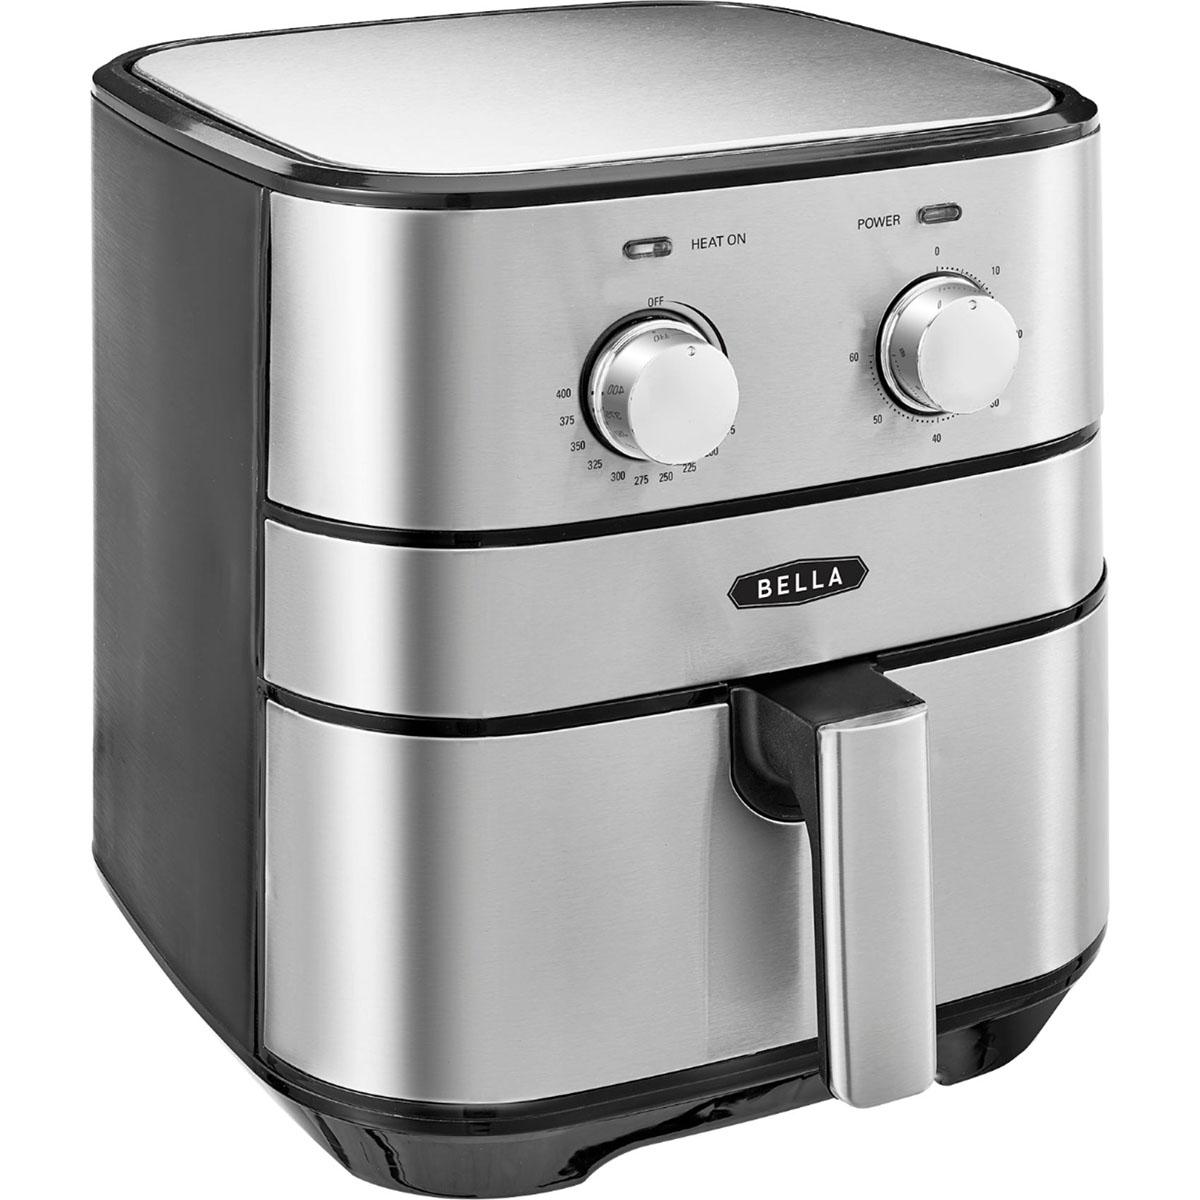 Bella 4Qt Analog Air Convection Fryer for $34.99